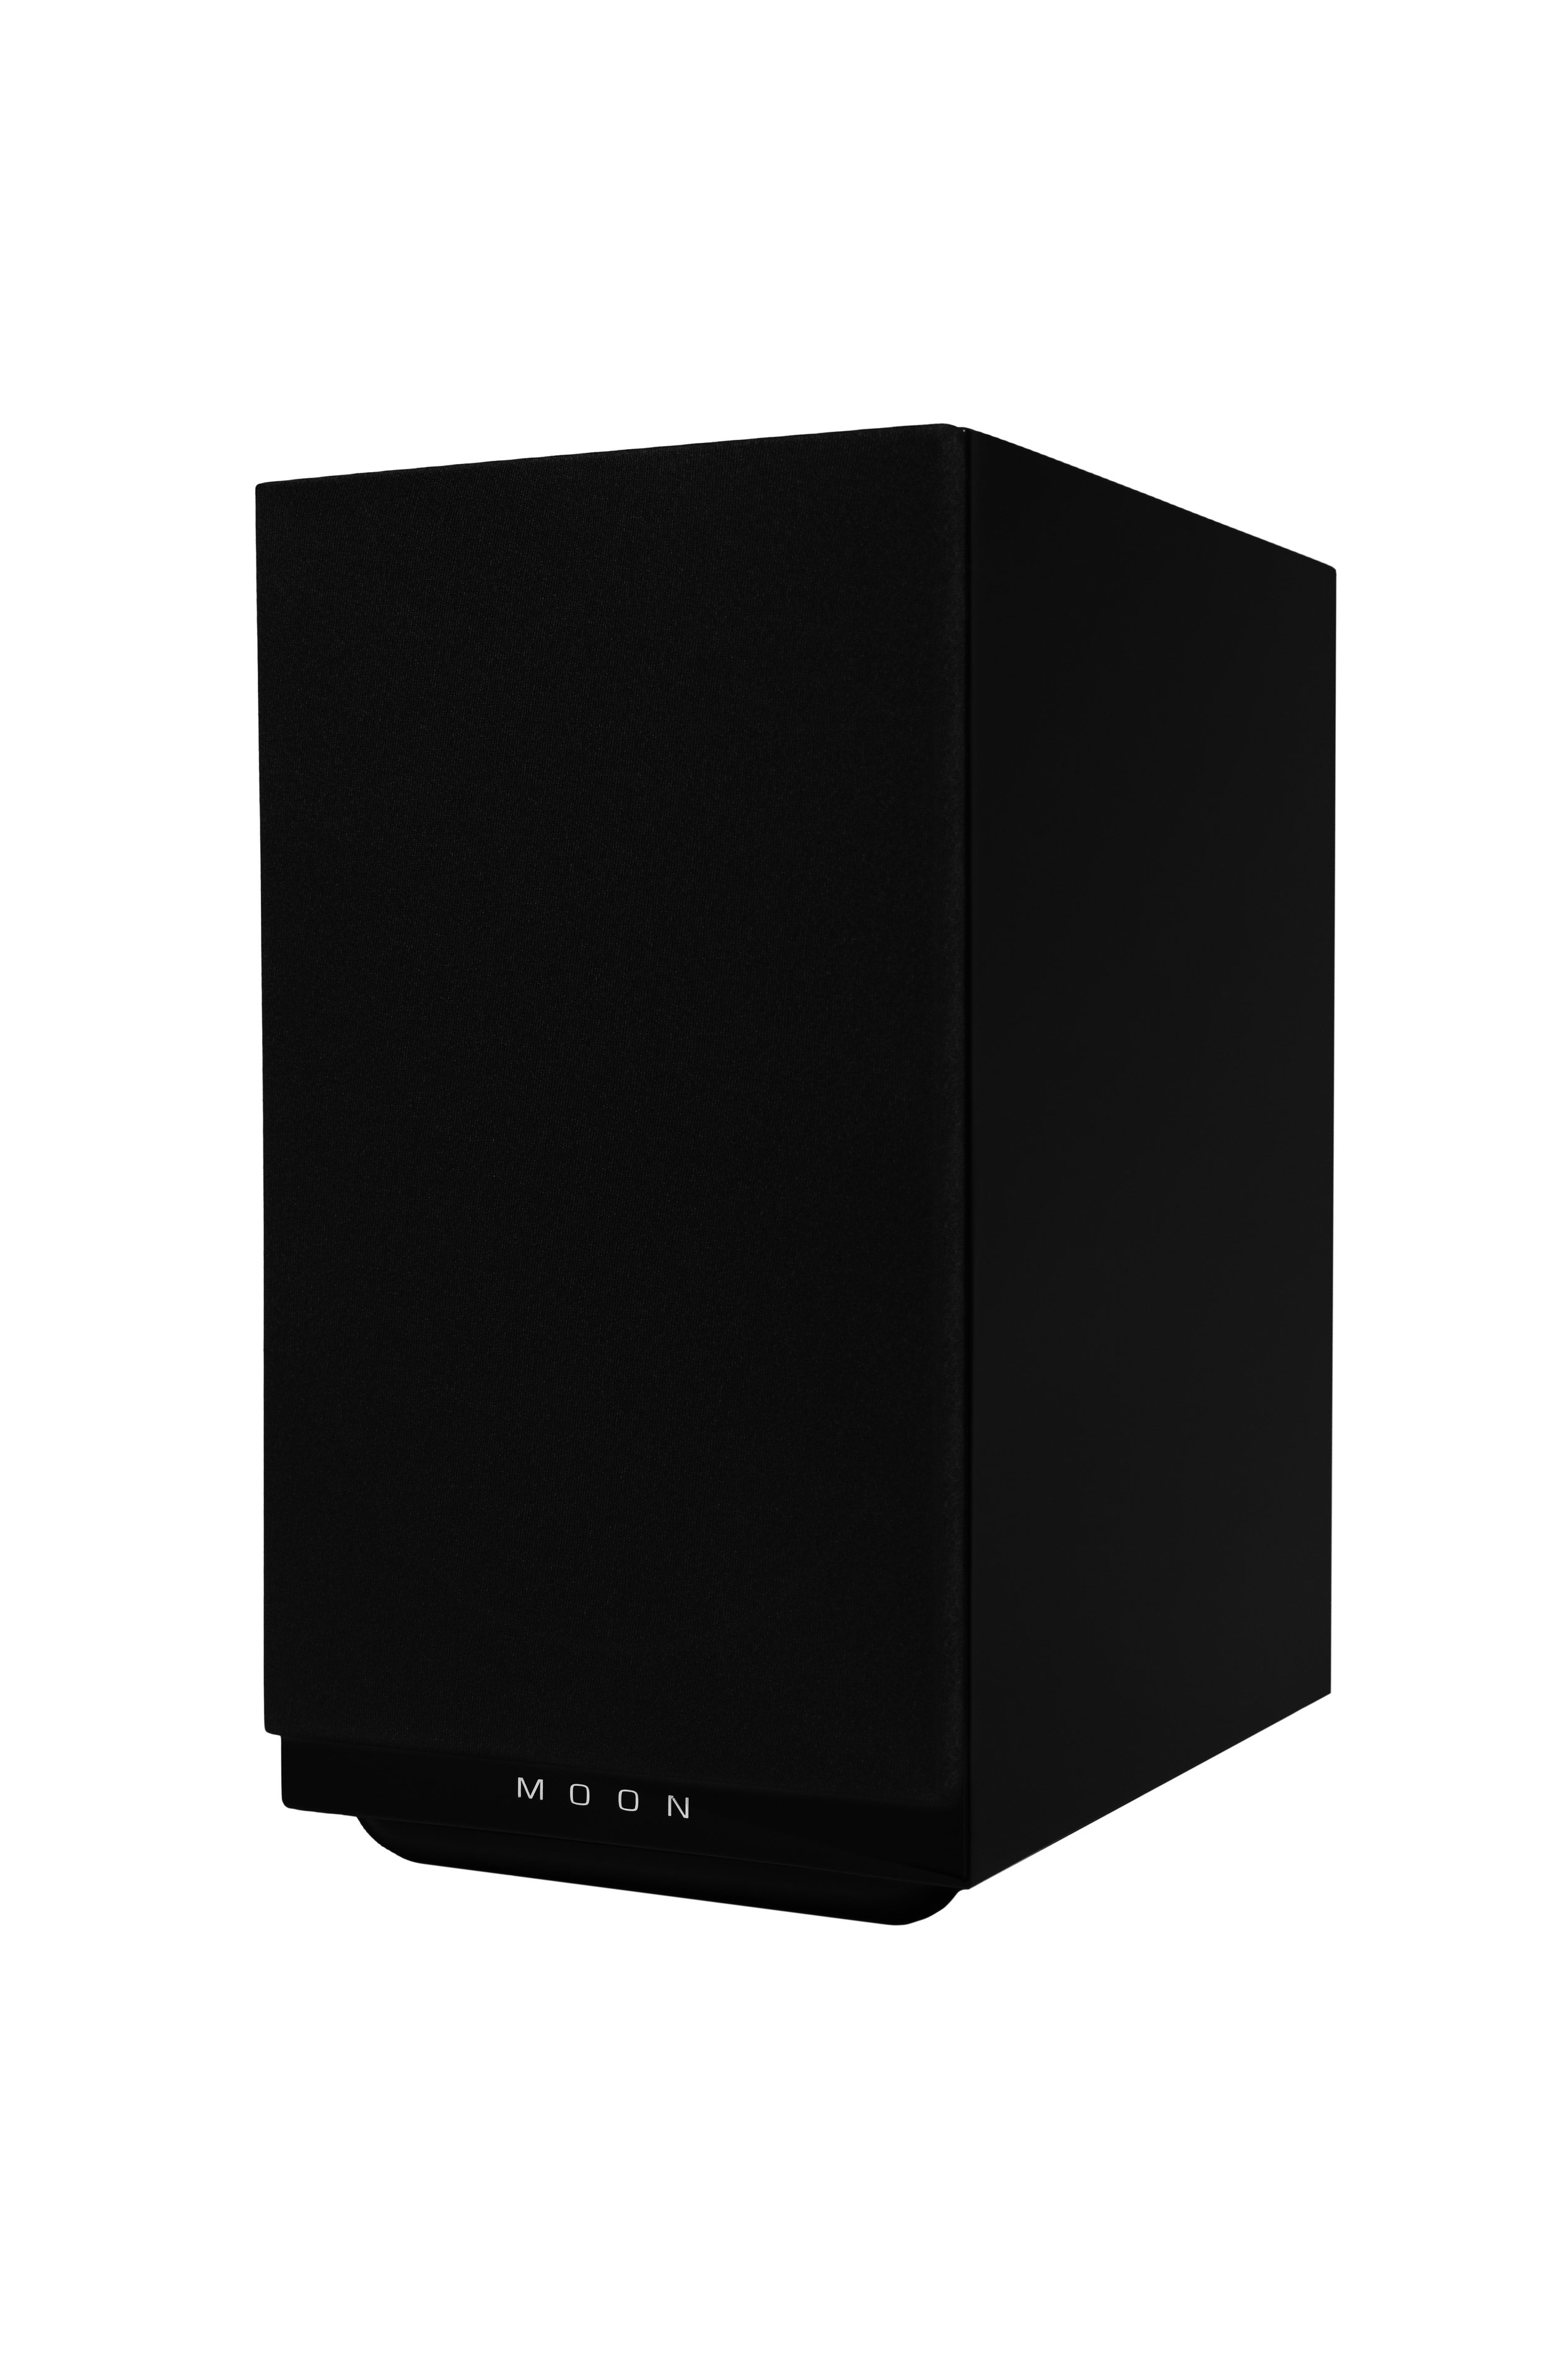 16.1.12. Voice 22 Black with grille.jpg